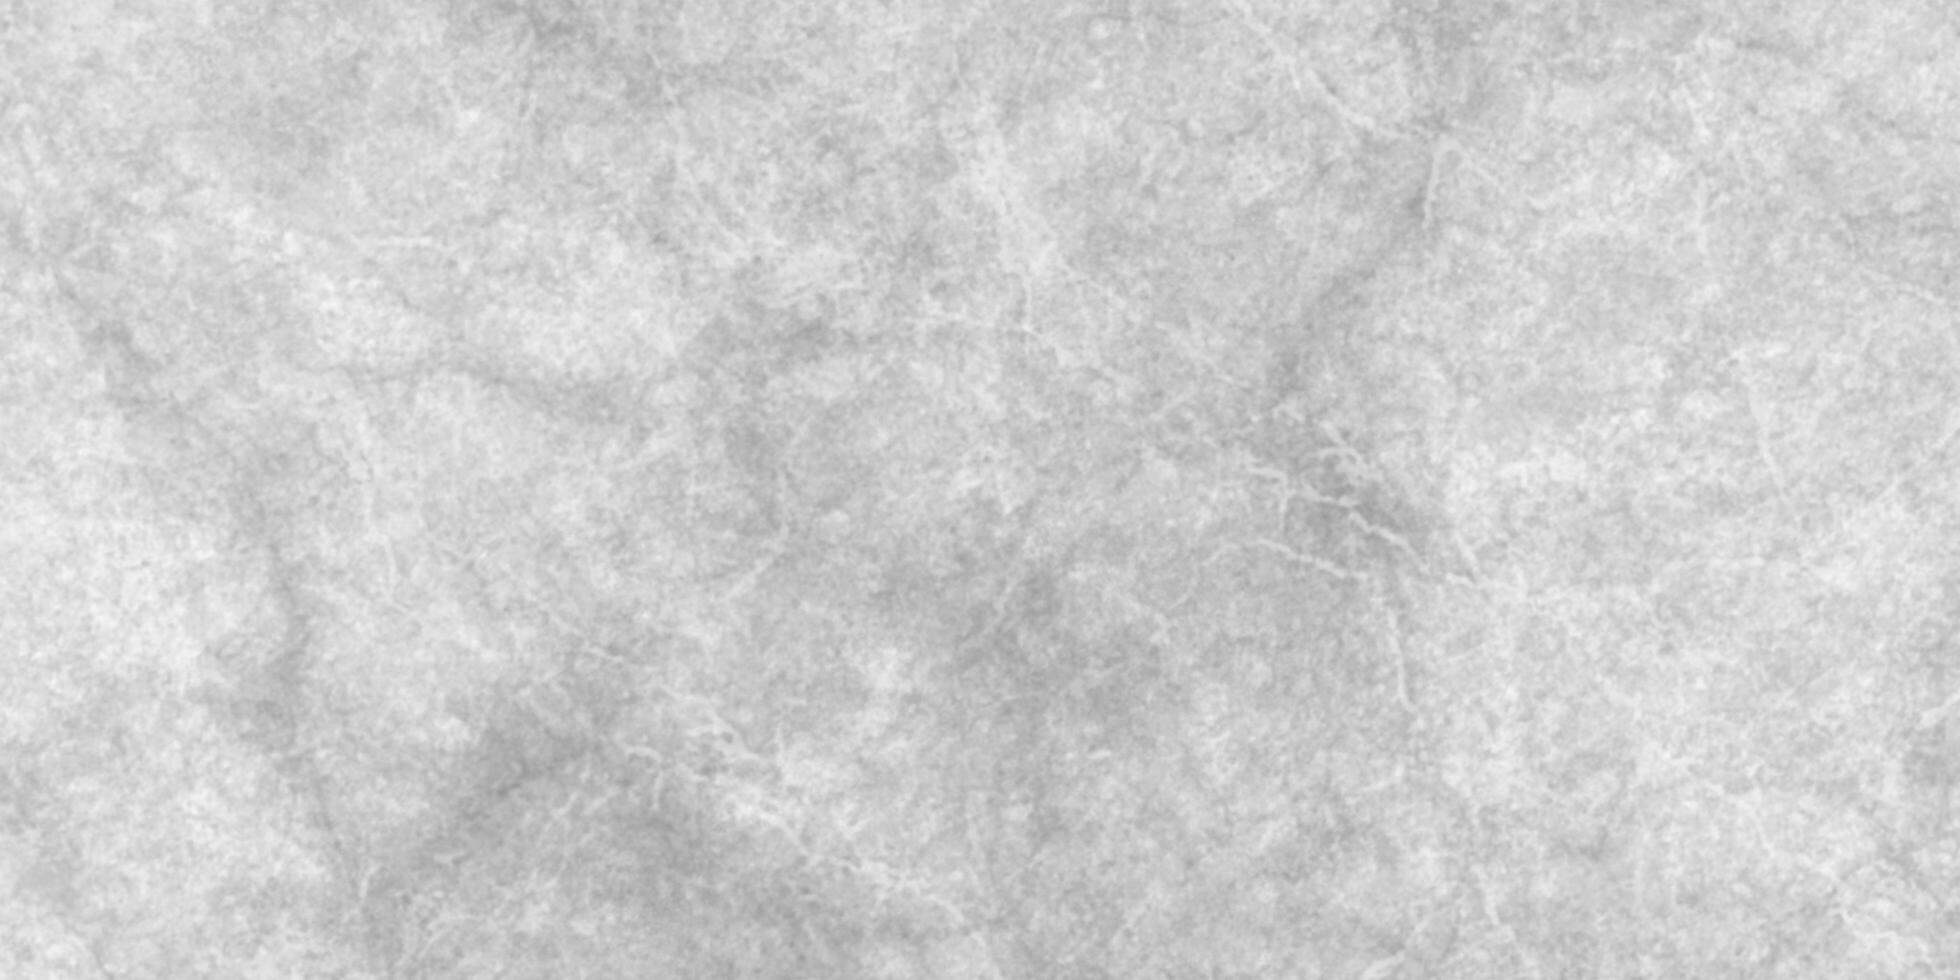 Seamless Marble Texture Stock Photos, Images and Backgrounds for